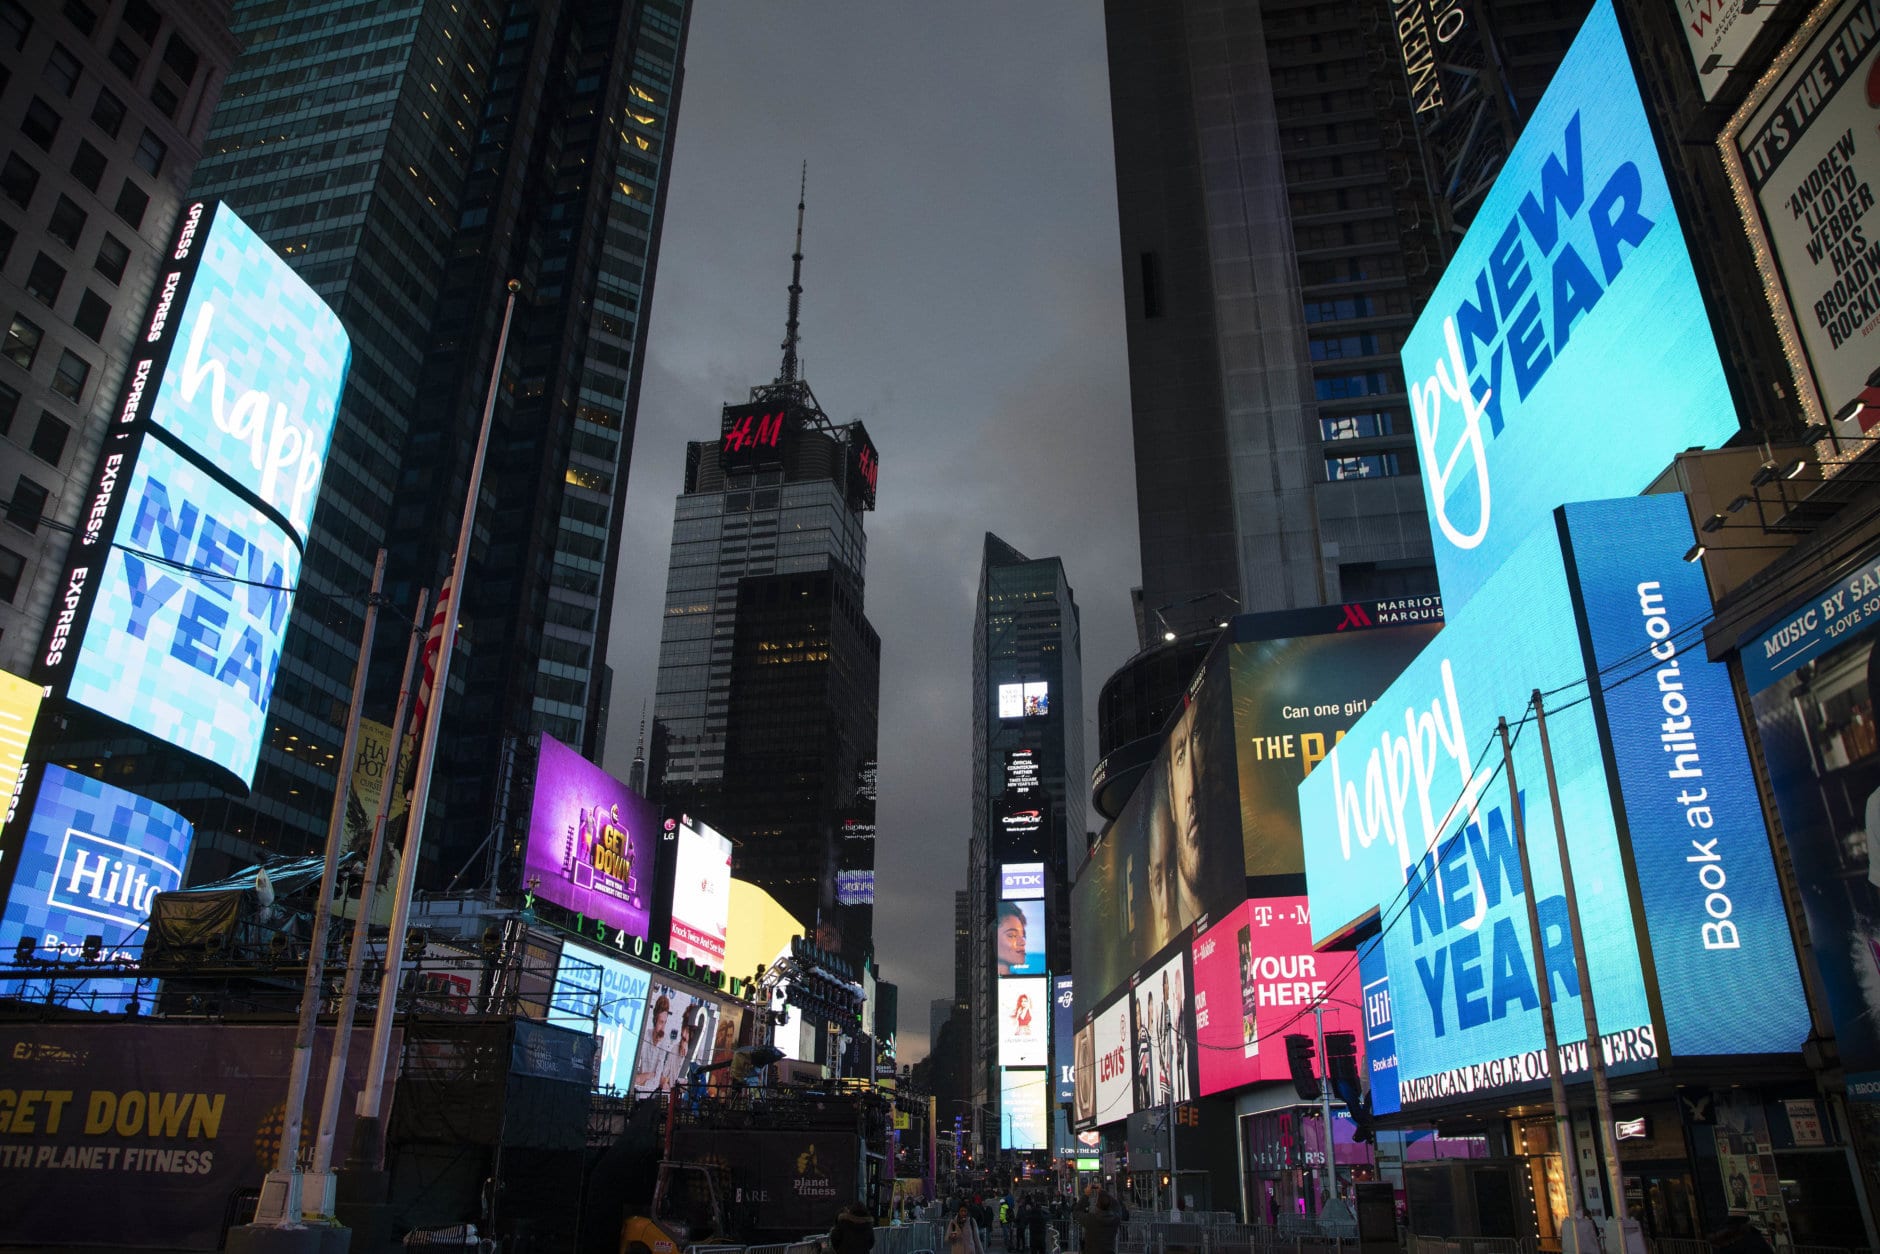 Billboards welcome in the new year in New York's Times Square, Monday, Dec. 31, 2018. (AP Photo/Mark Lennihan)